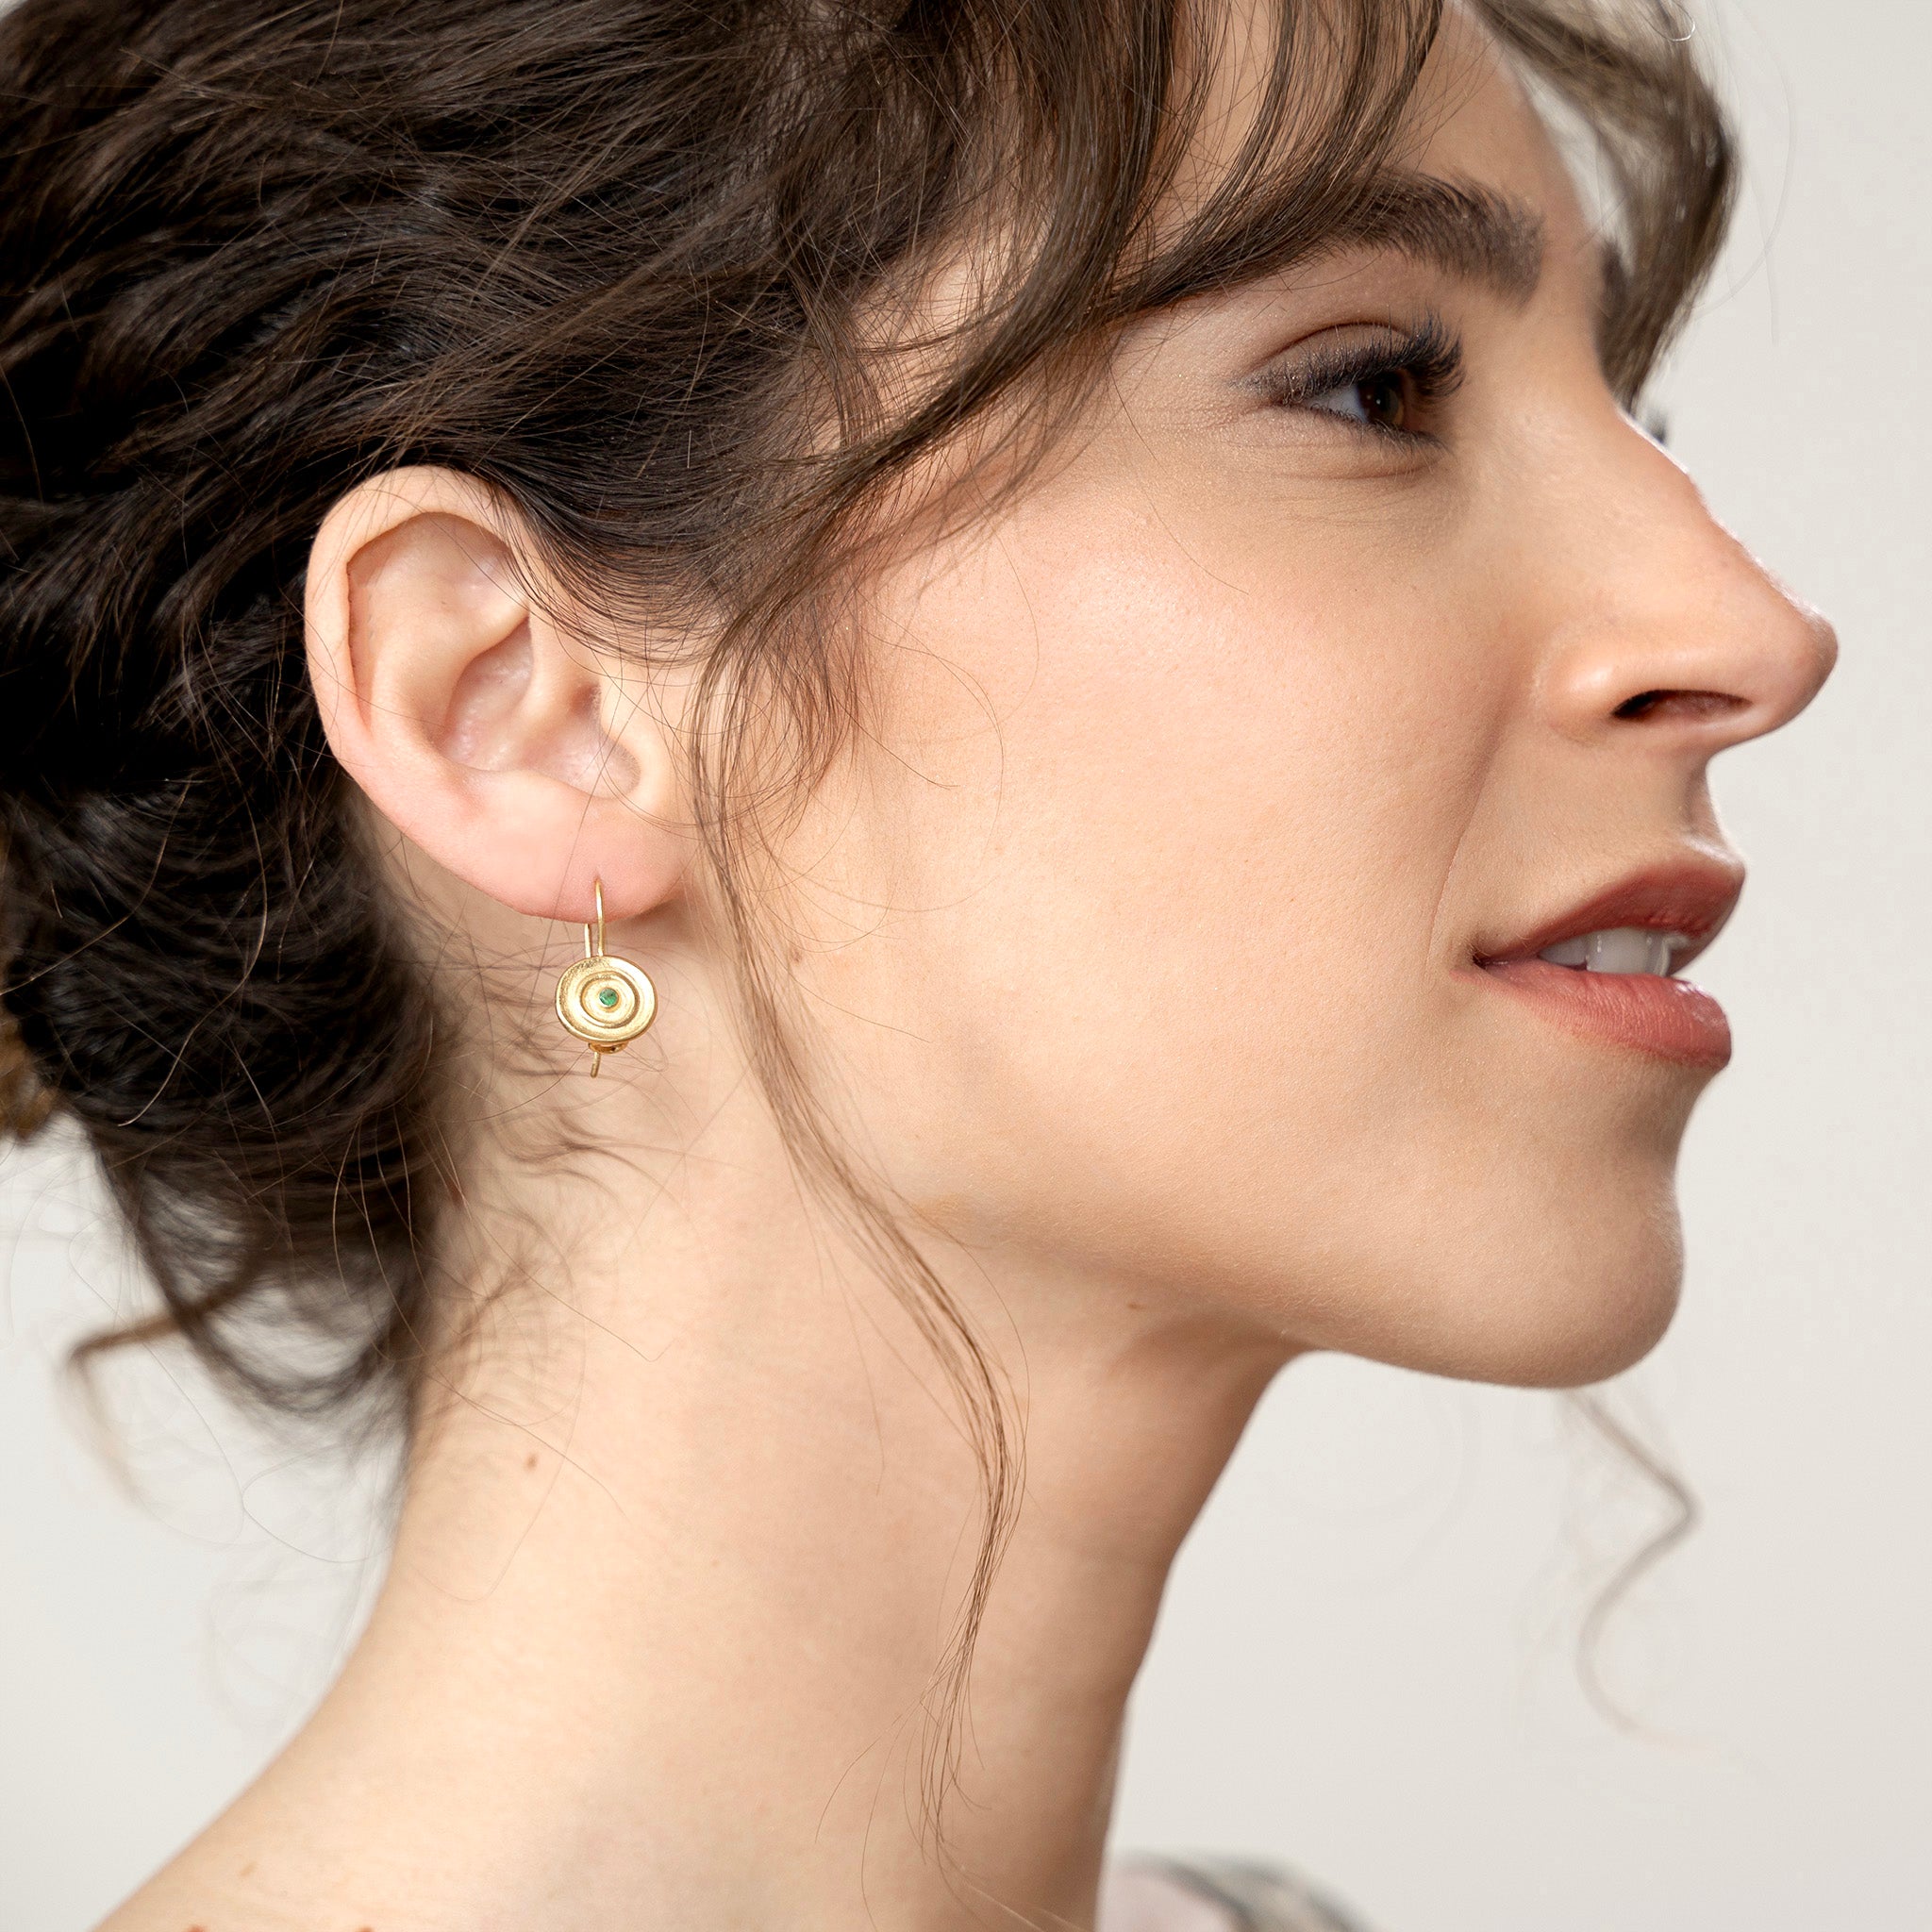 Model displaying an Hand-made 18k gold round drop earrings with a central Emerald gemstone, inspired by ancient Egyptian Pharaohs' gold jewelry.